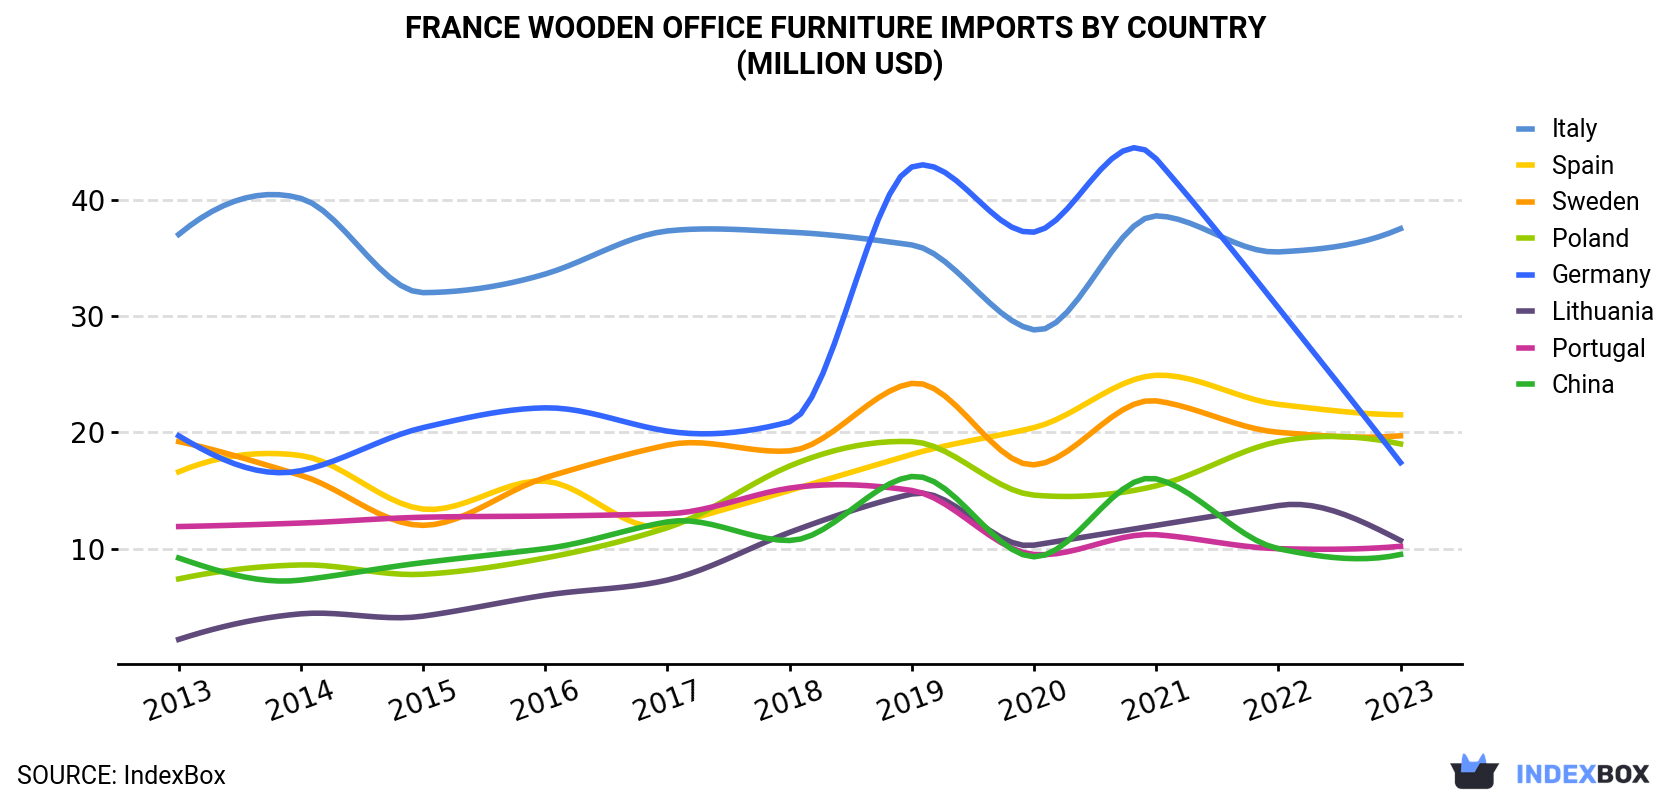 France Wooden Office Furniture Imports By Country (Million USD)